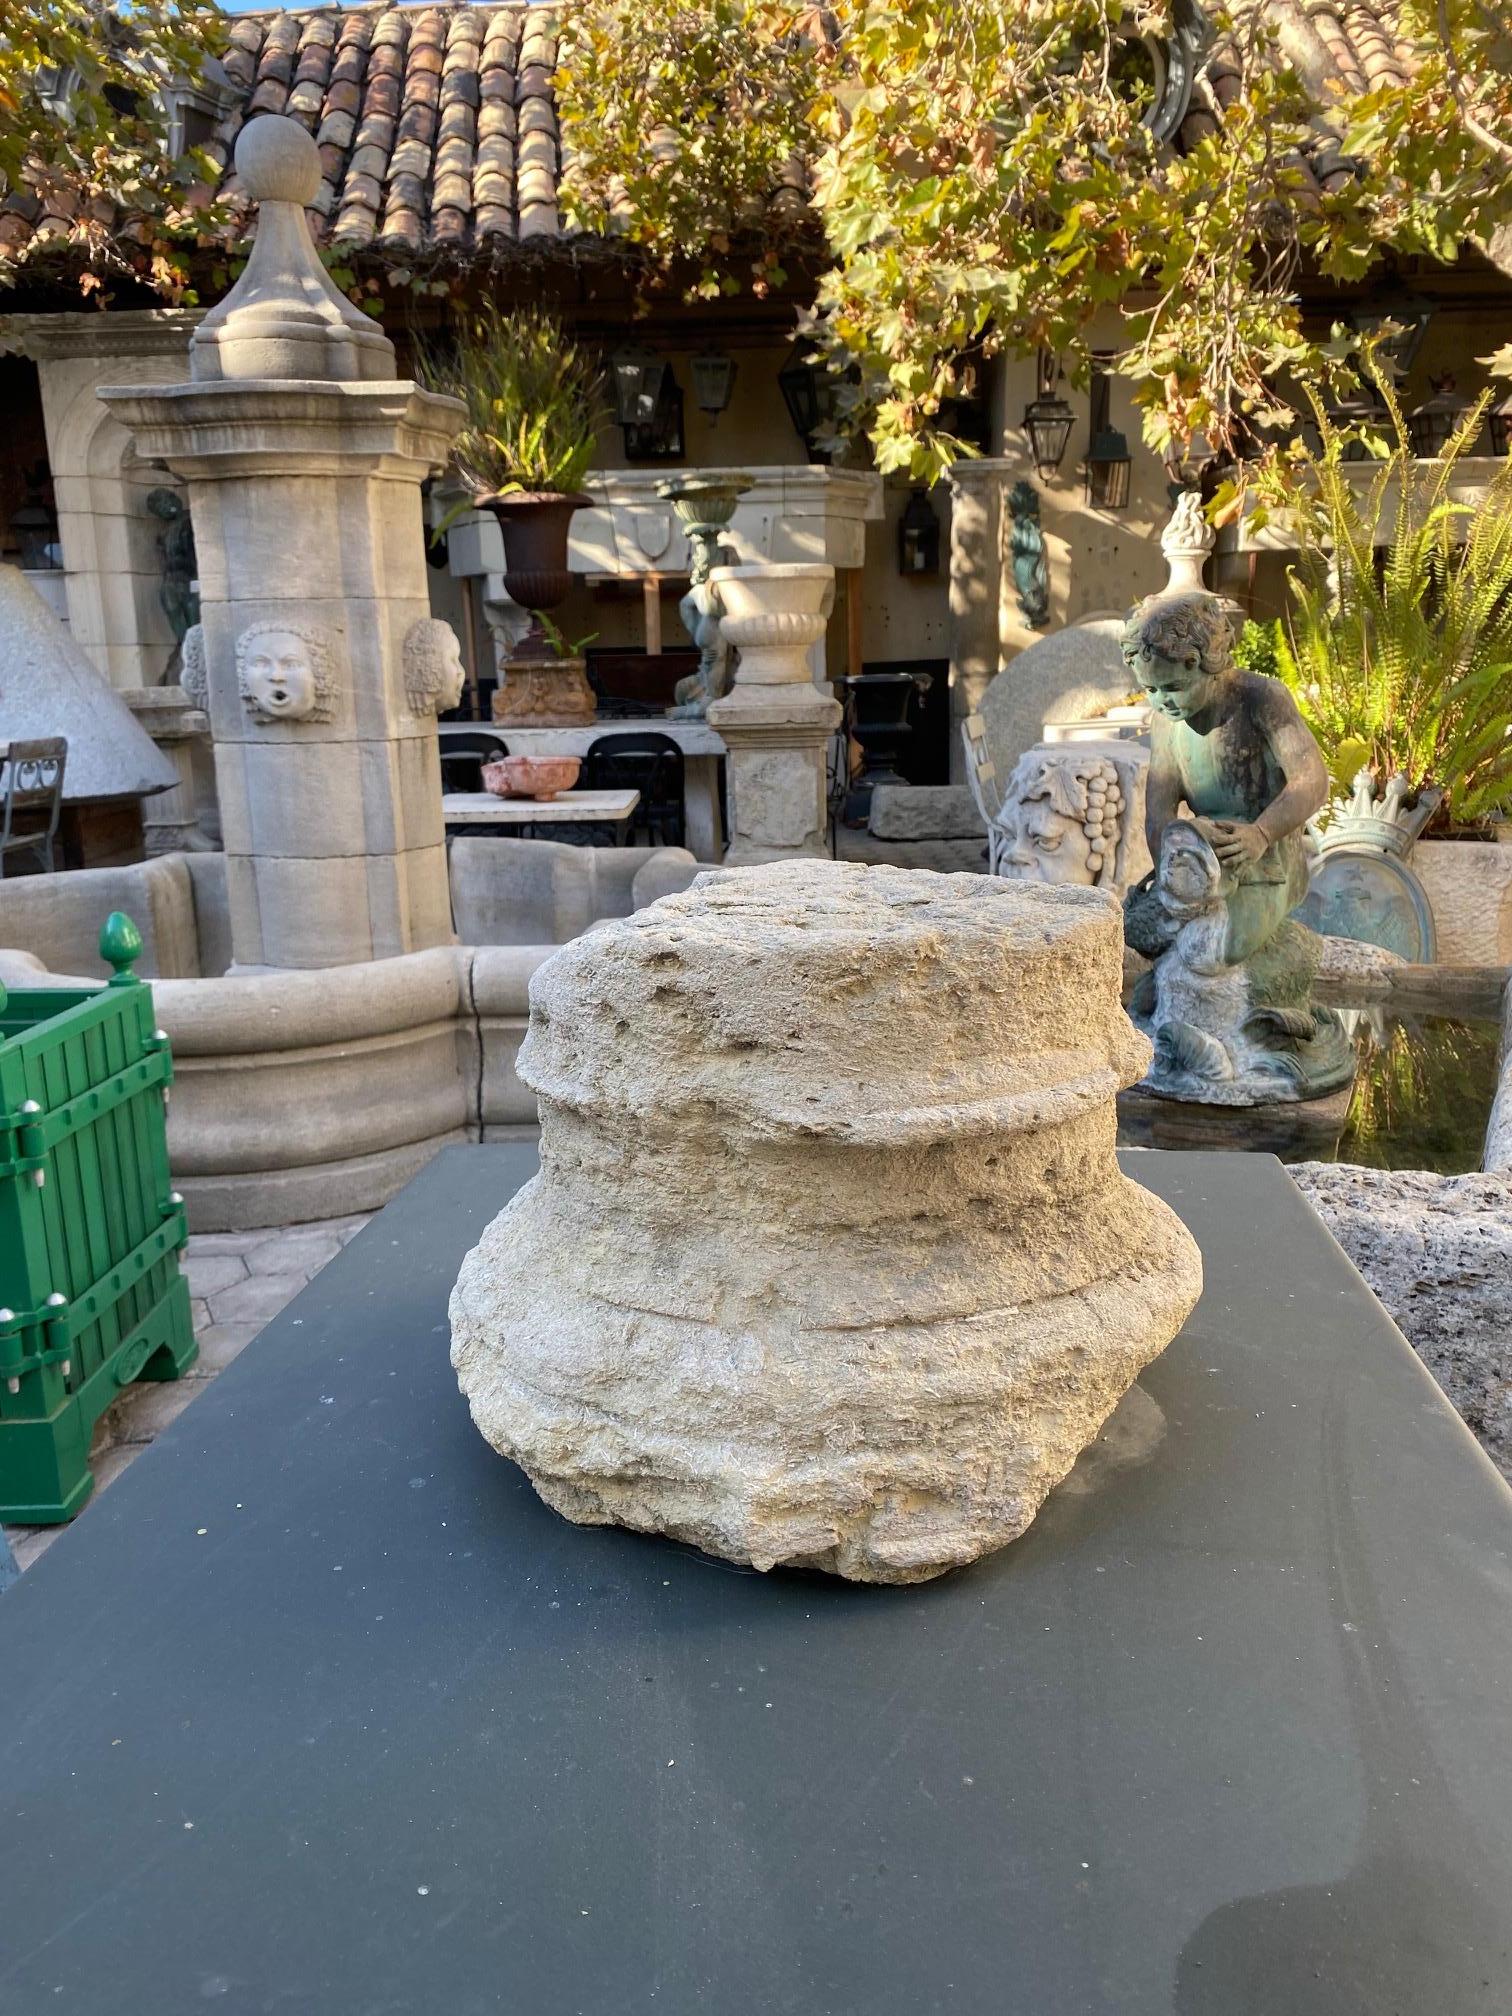 Nicely hand carved 18th century stone column base, it could be used as a capital architectural element in an entryway or as a doorstop, a statement sculpture of carved limestone Chapiteau from a cloister in France. From an ornamental point of view,